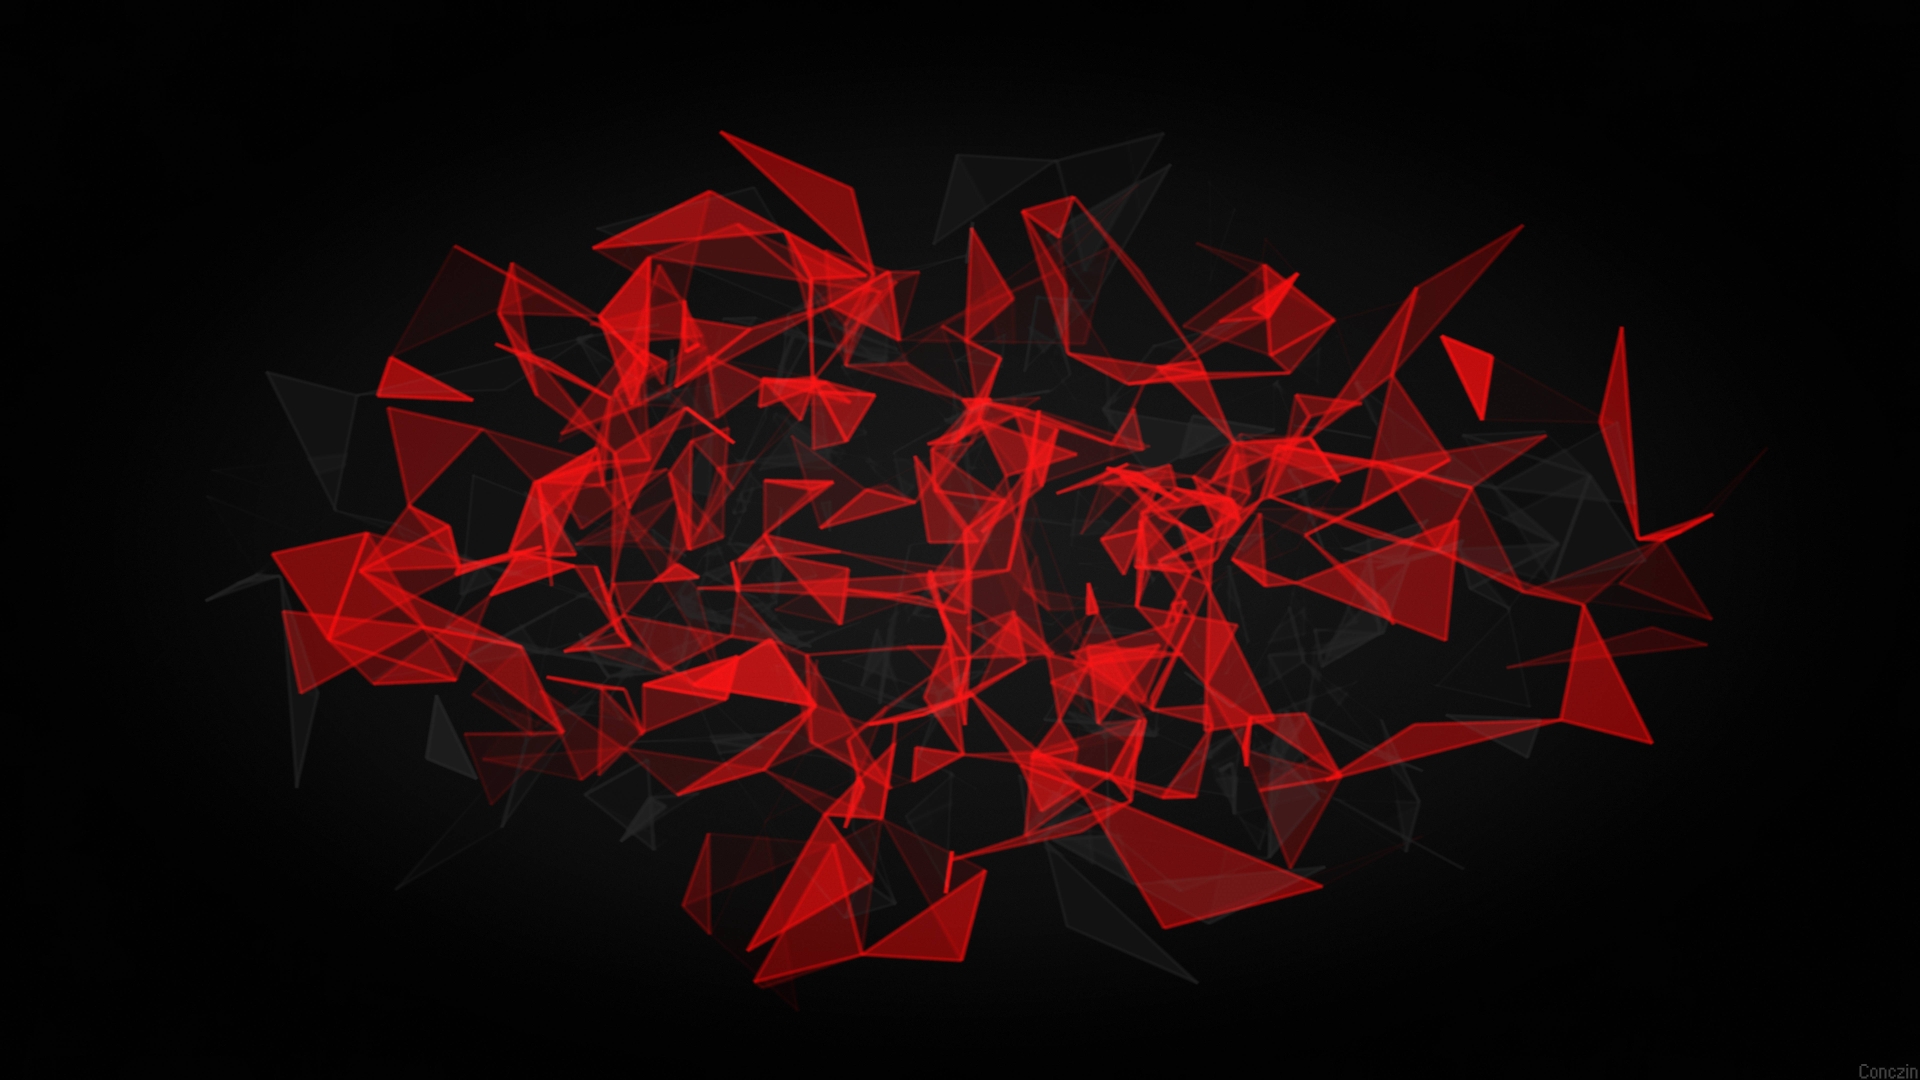 1920x1080 Red And Black Polygon 1080p Laptop Full Hd Wallpaper Hd Abstract 4k Wallpapers Images Photos And Background